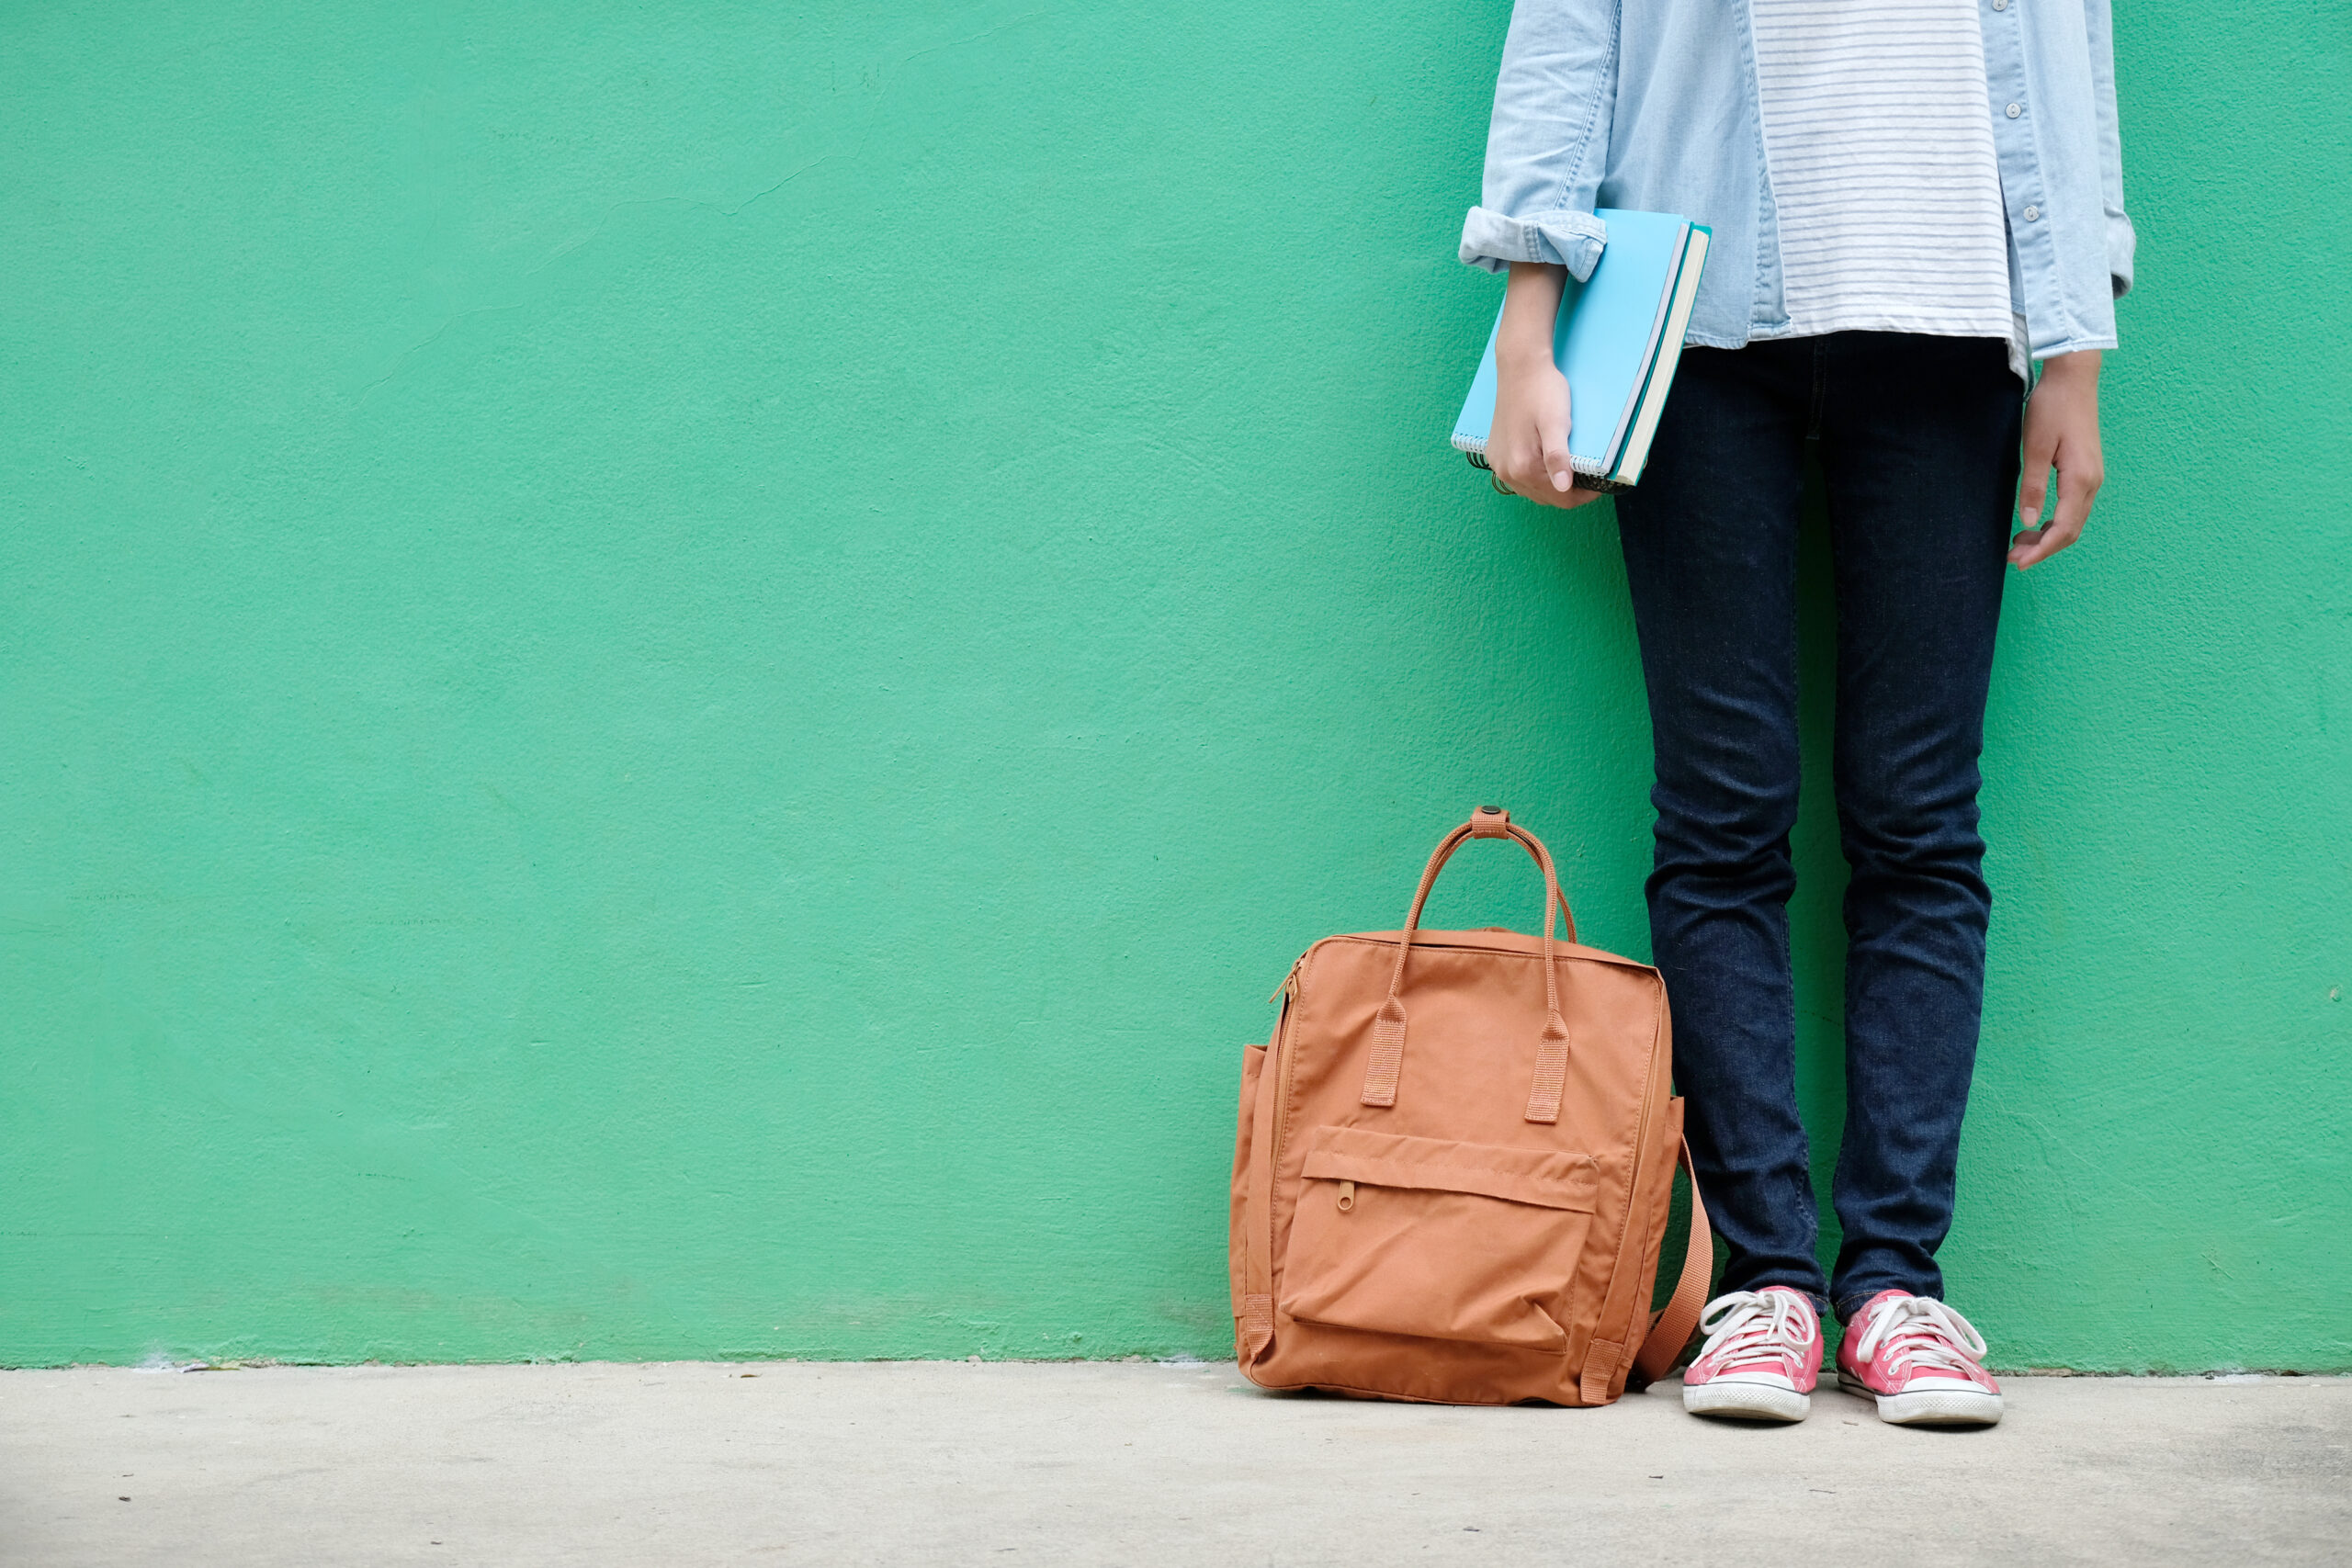 the image shows the bottom half of a young person standing and holding their books, with their bag by their feet